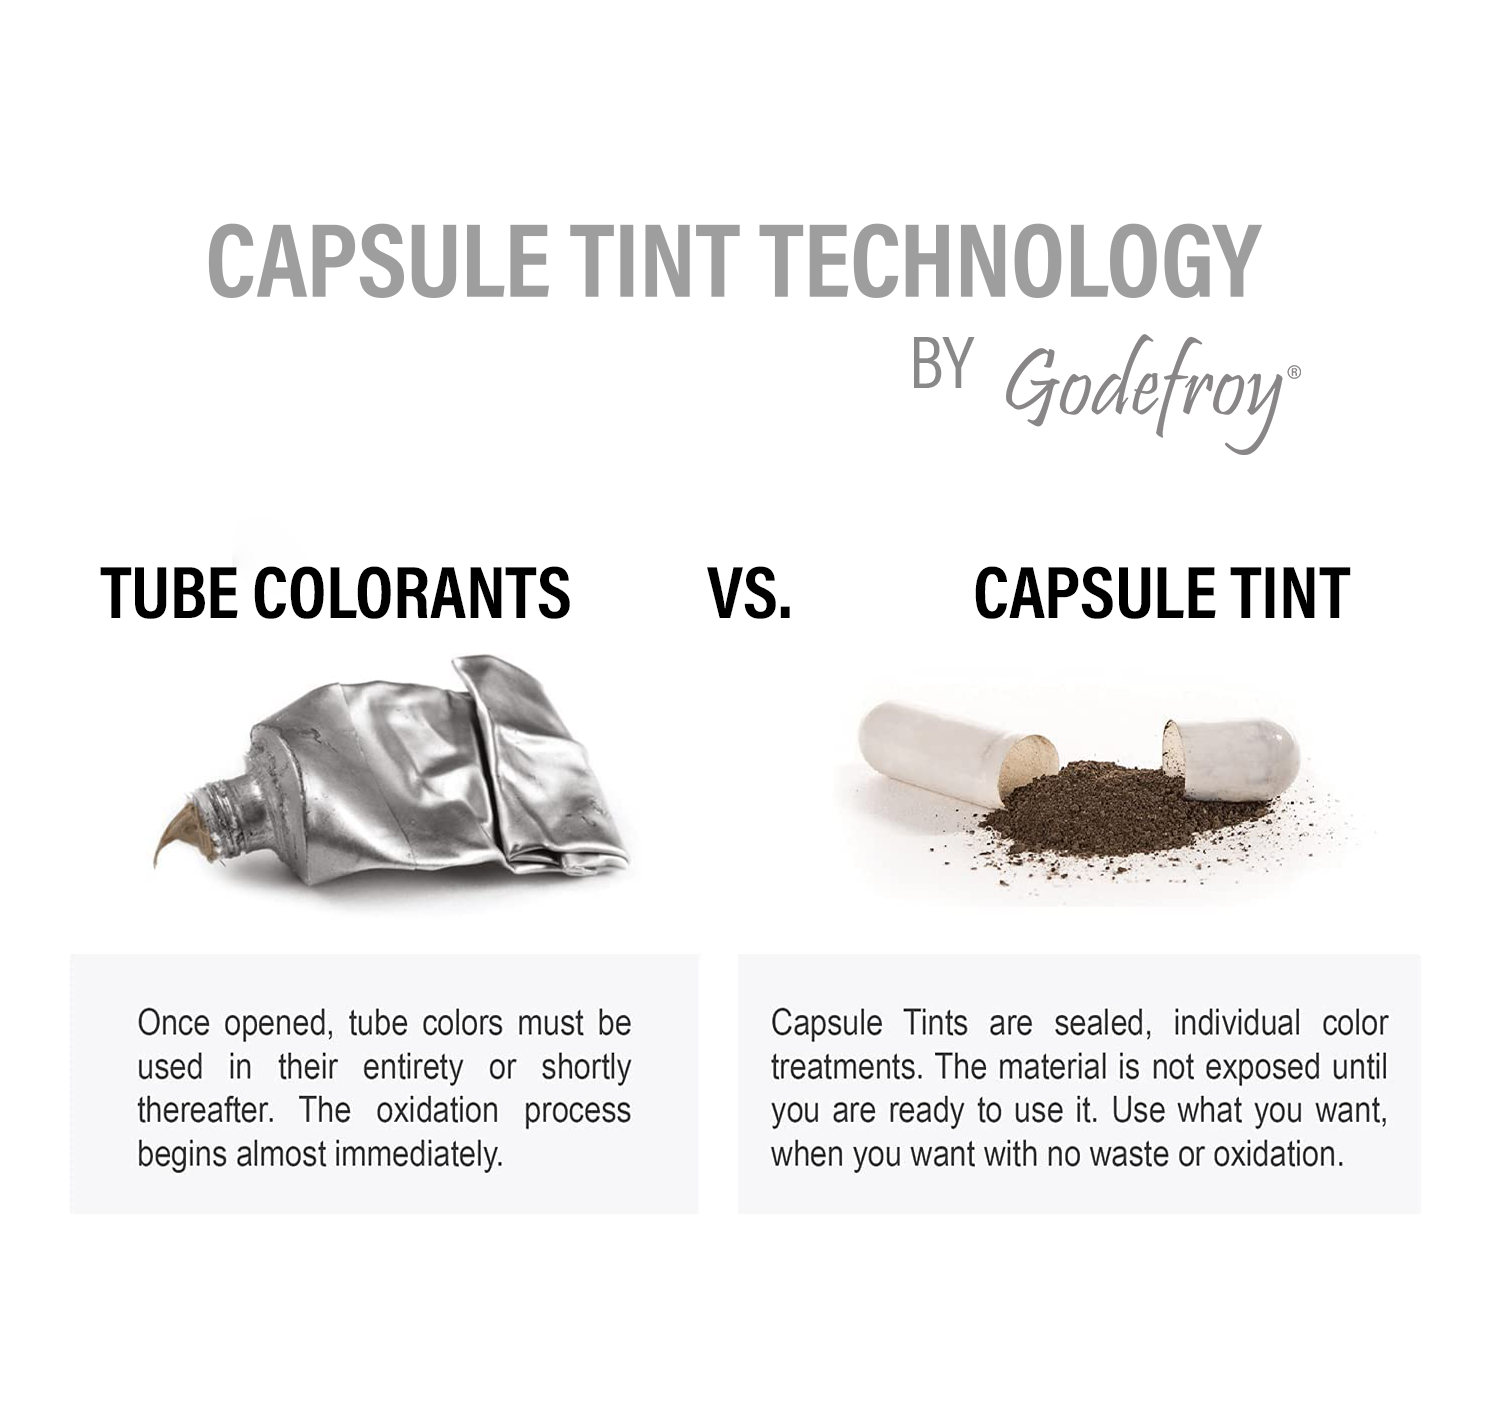 Godefroy tint capsule technology